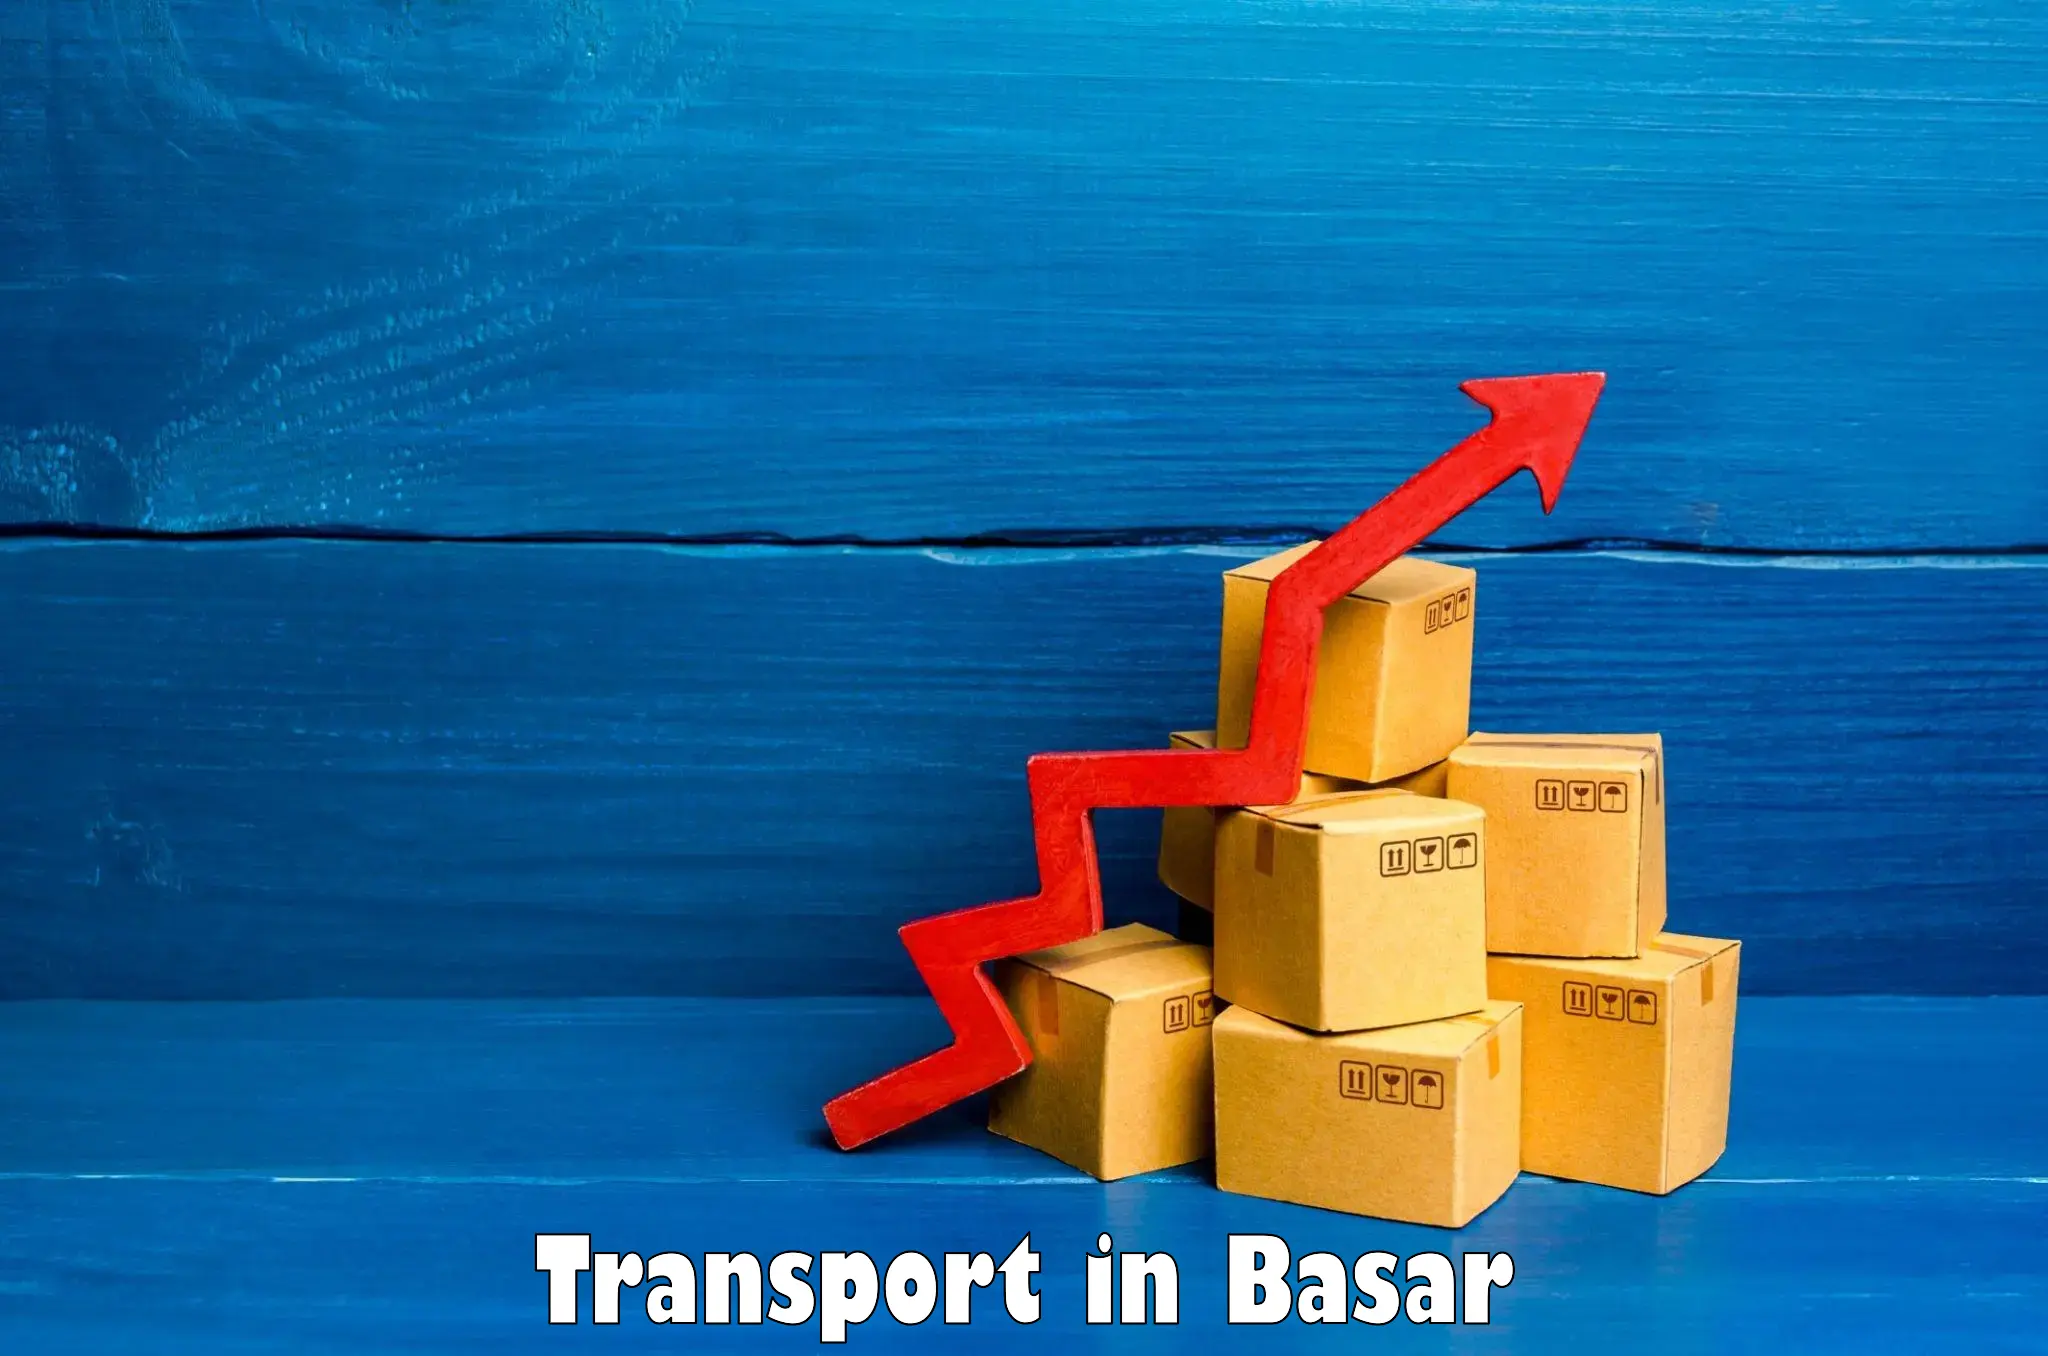 Air freight transport services in Basar